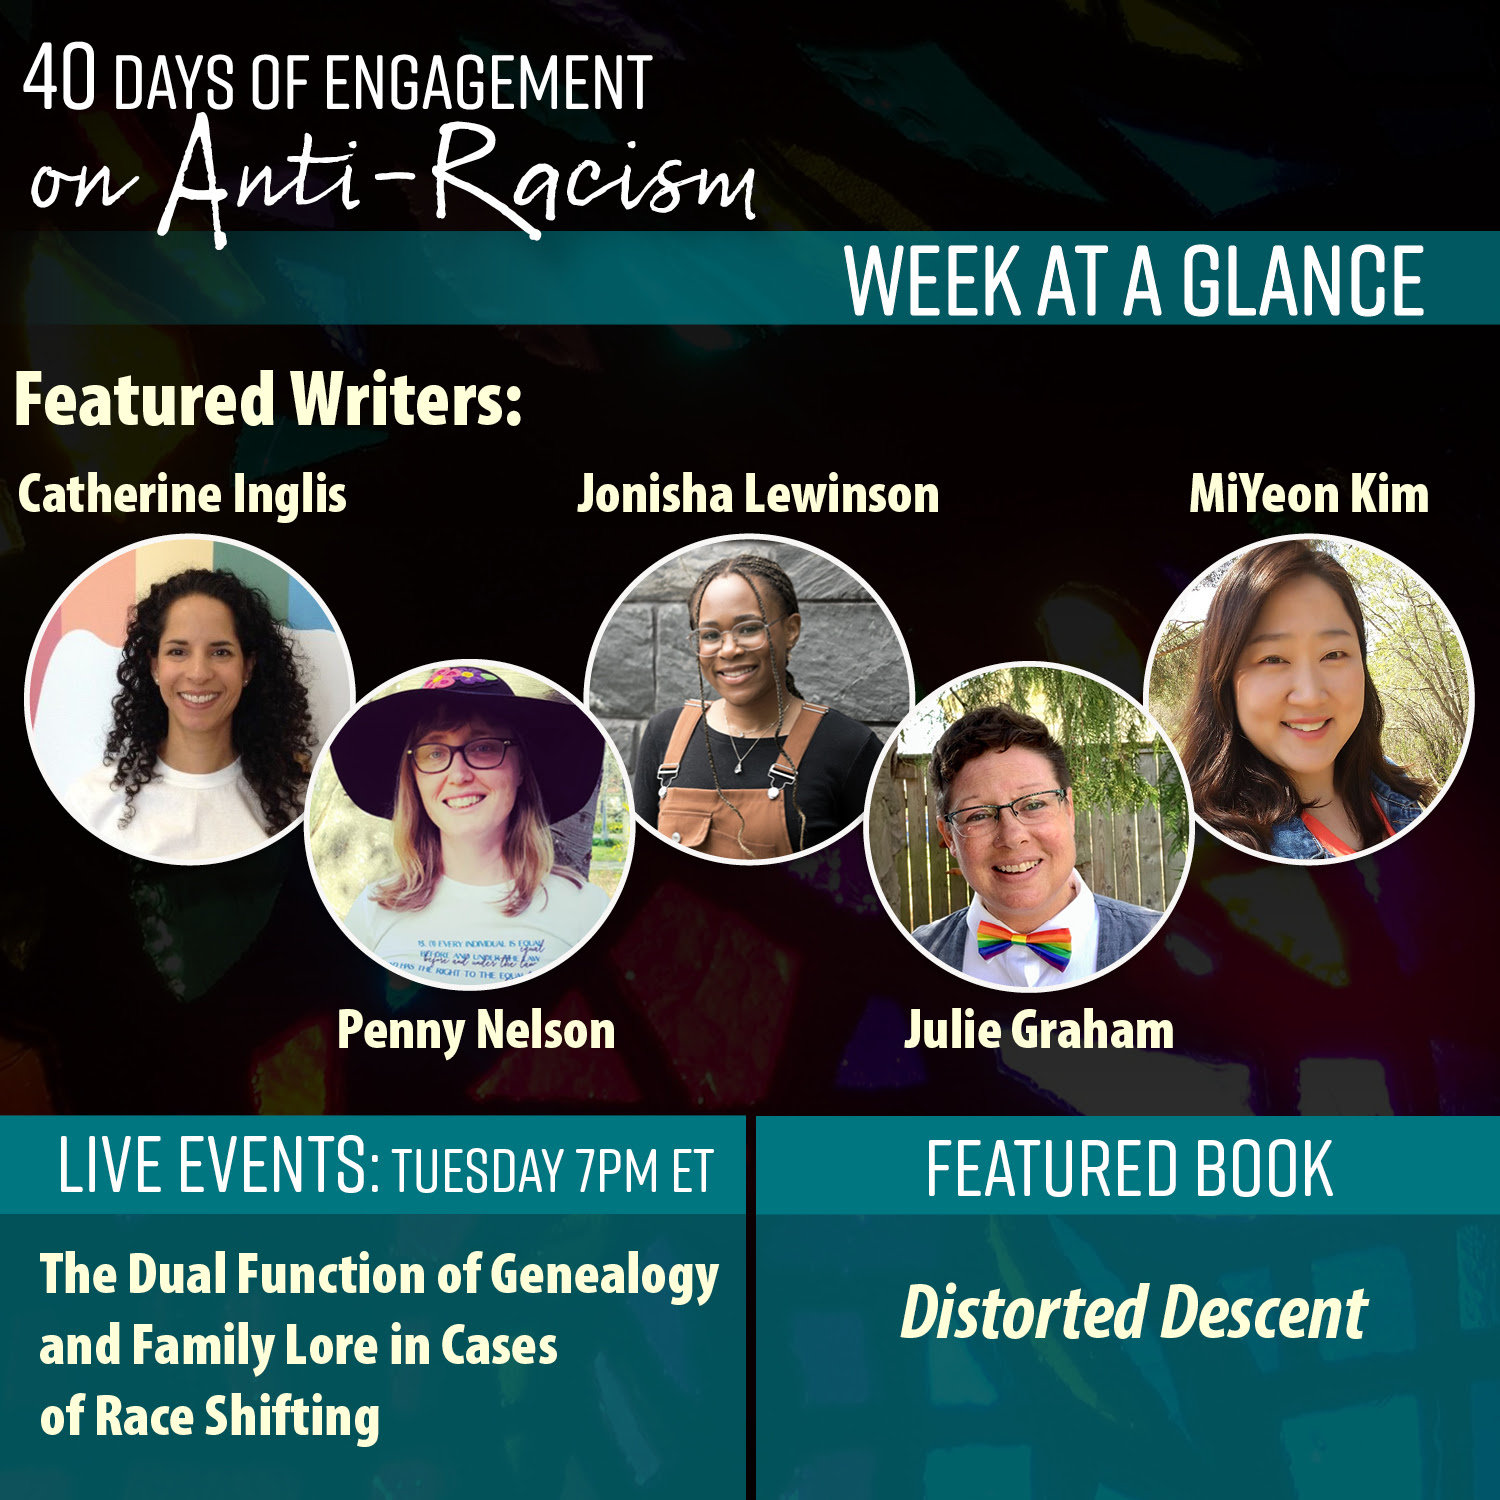 The 40 Days of Engagement on Anti-Racism week at a glance